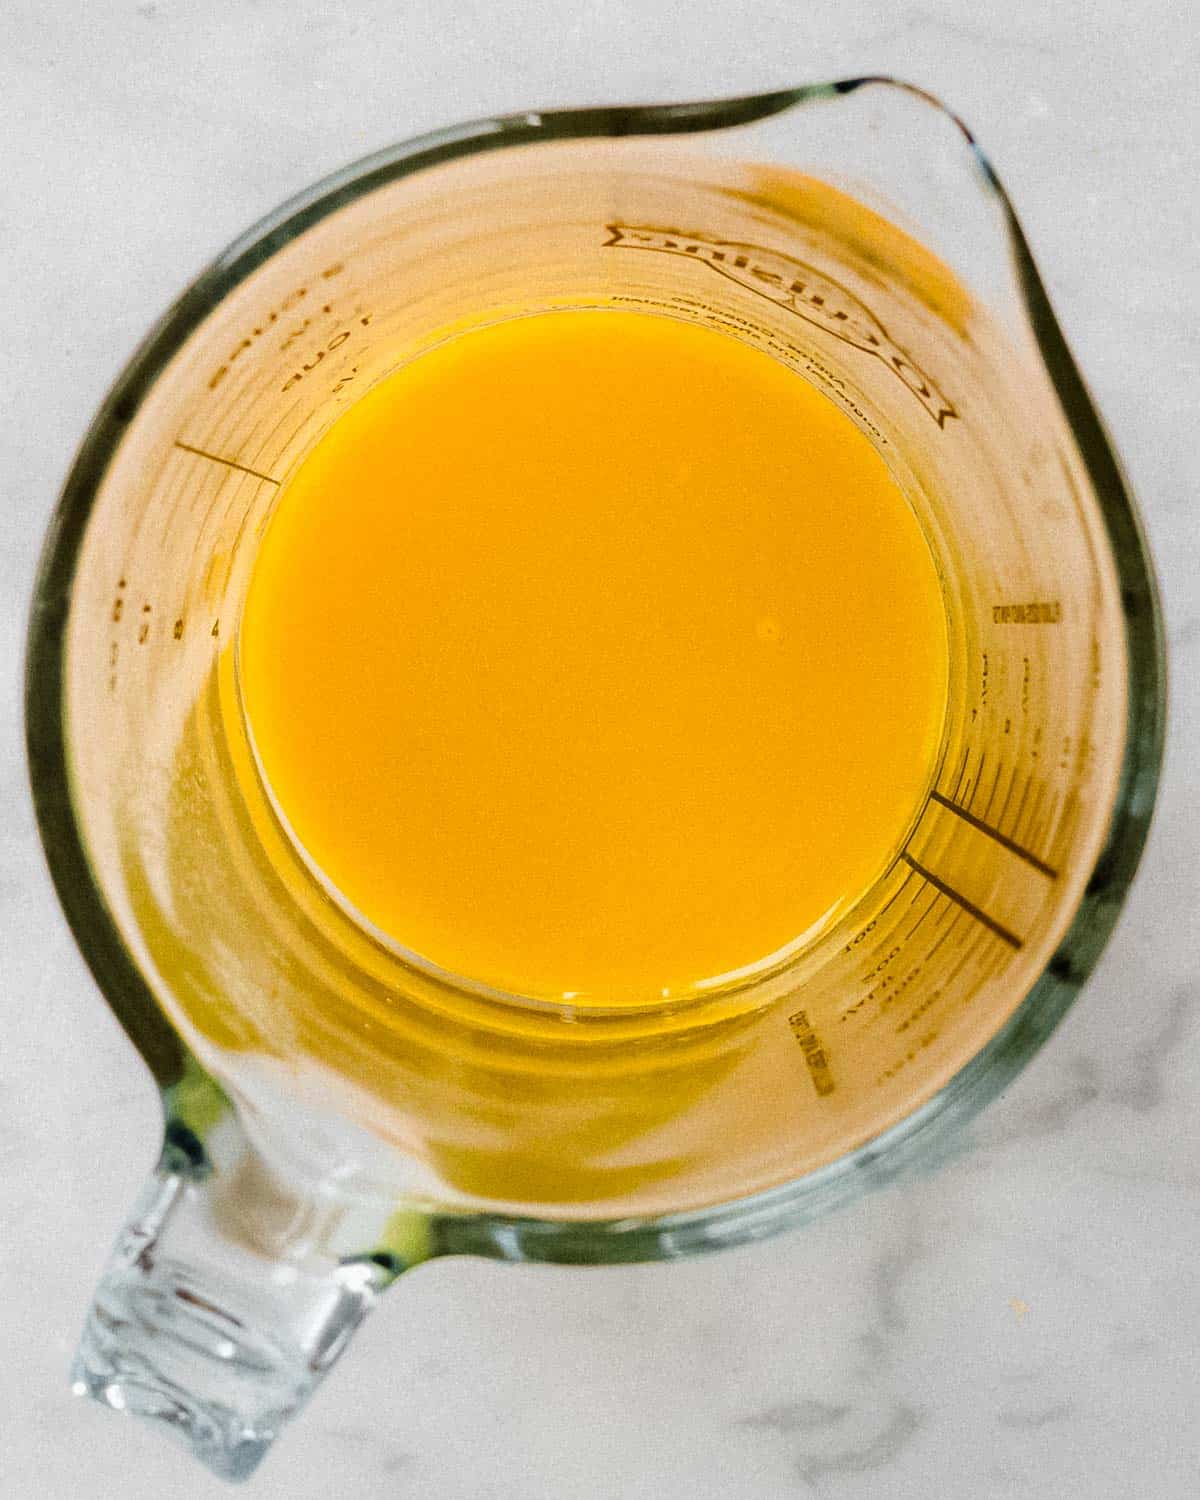 strained lemon ginger turmeric mix in a glass measuring cup.